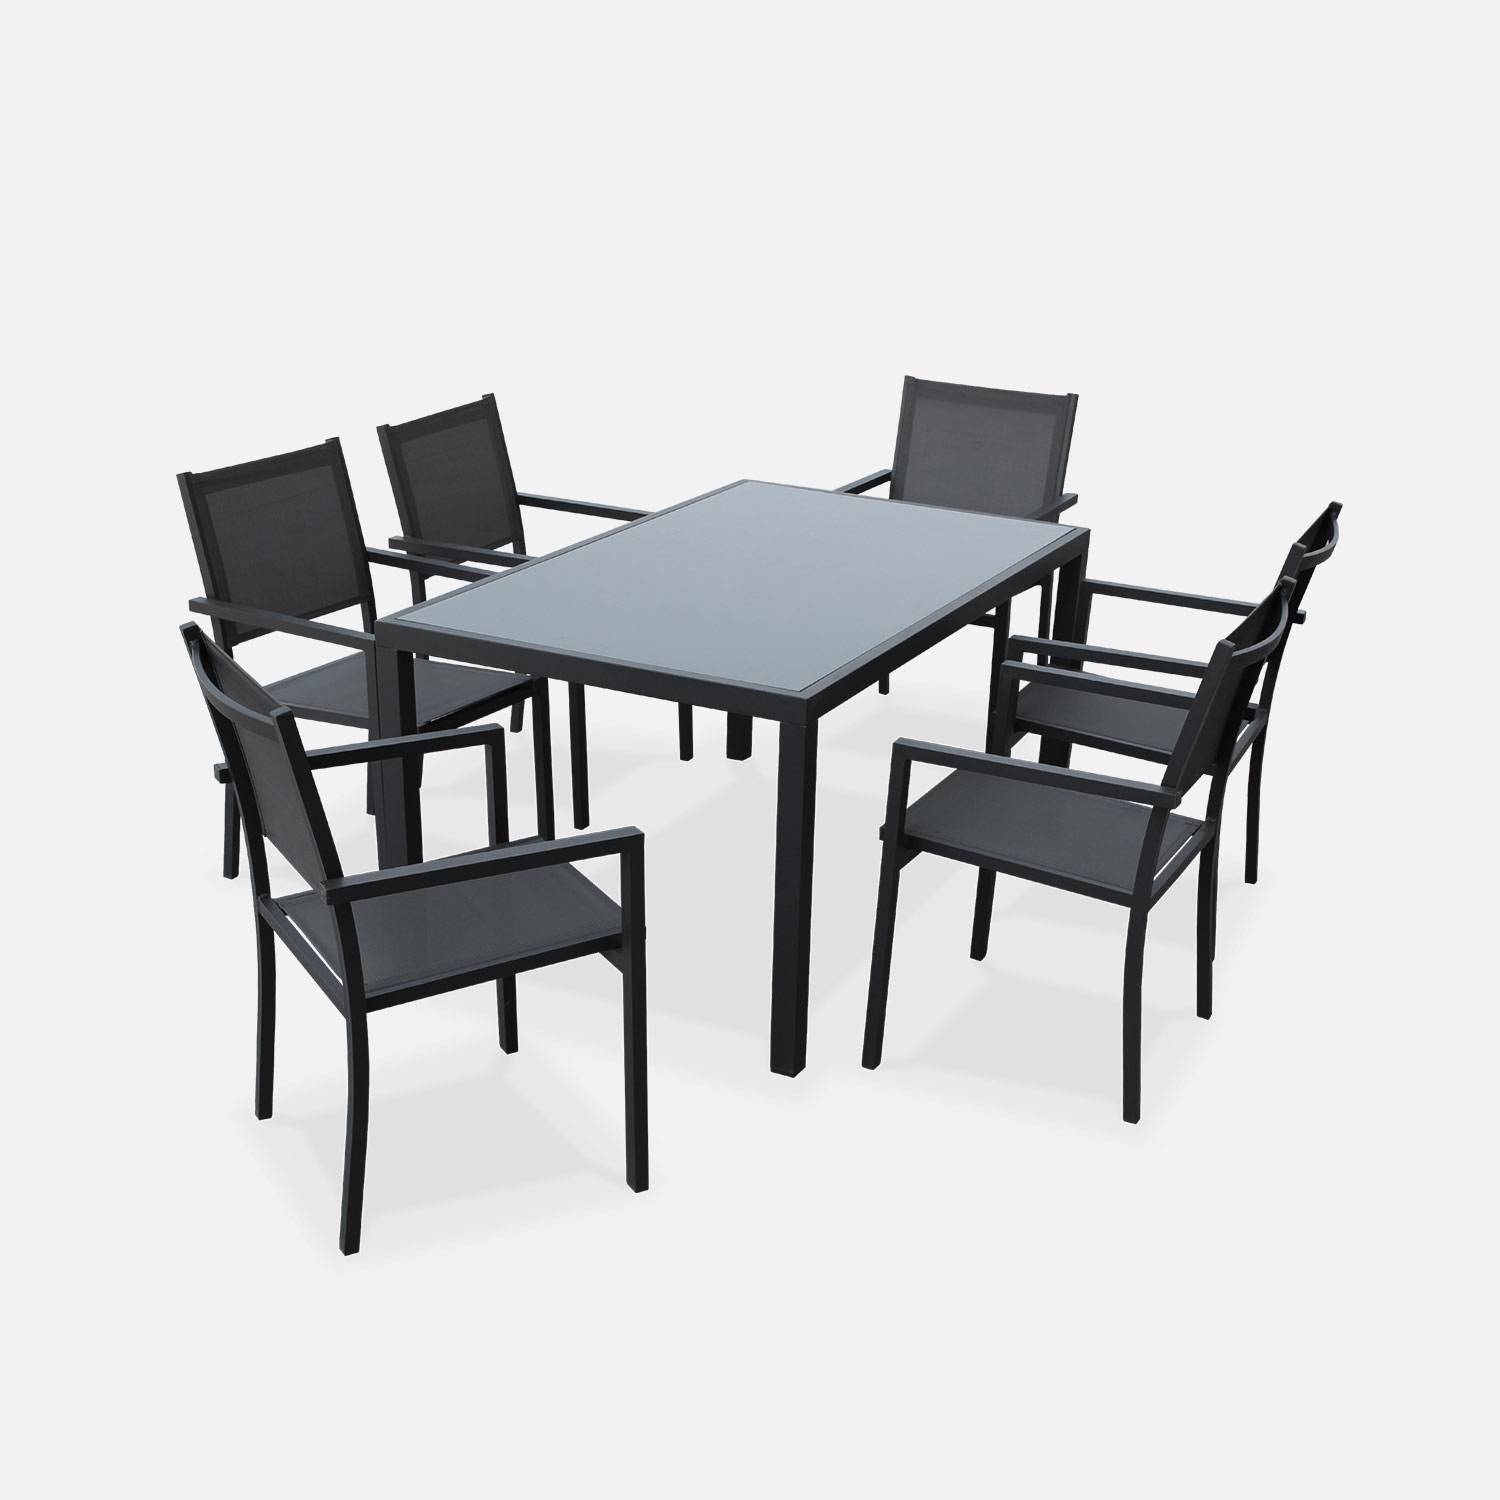 150cm aluminum garden table with 6 chairs, Anthracite / Grey | sweeek